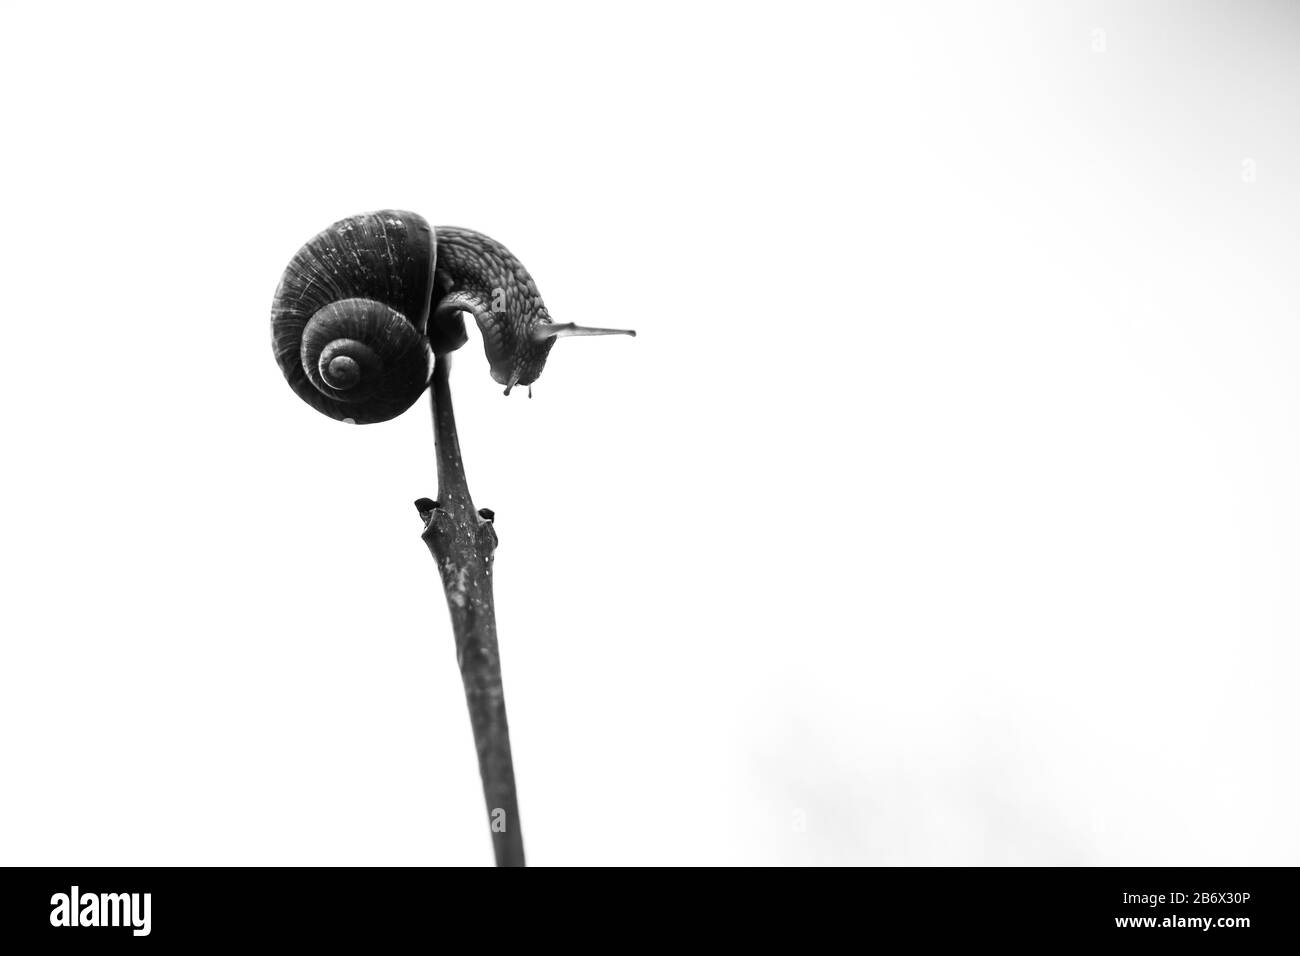 Snail on a tree with white background minimalist Stock Photo